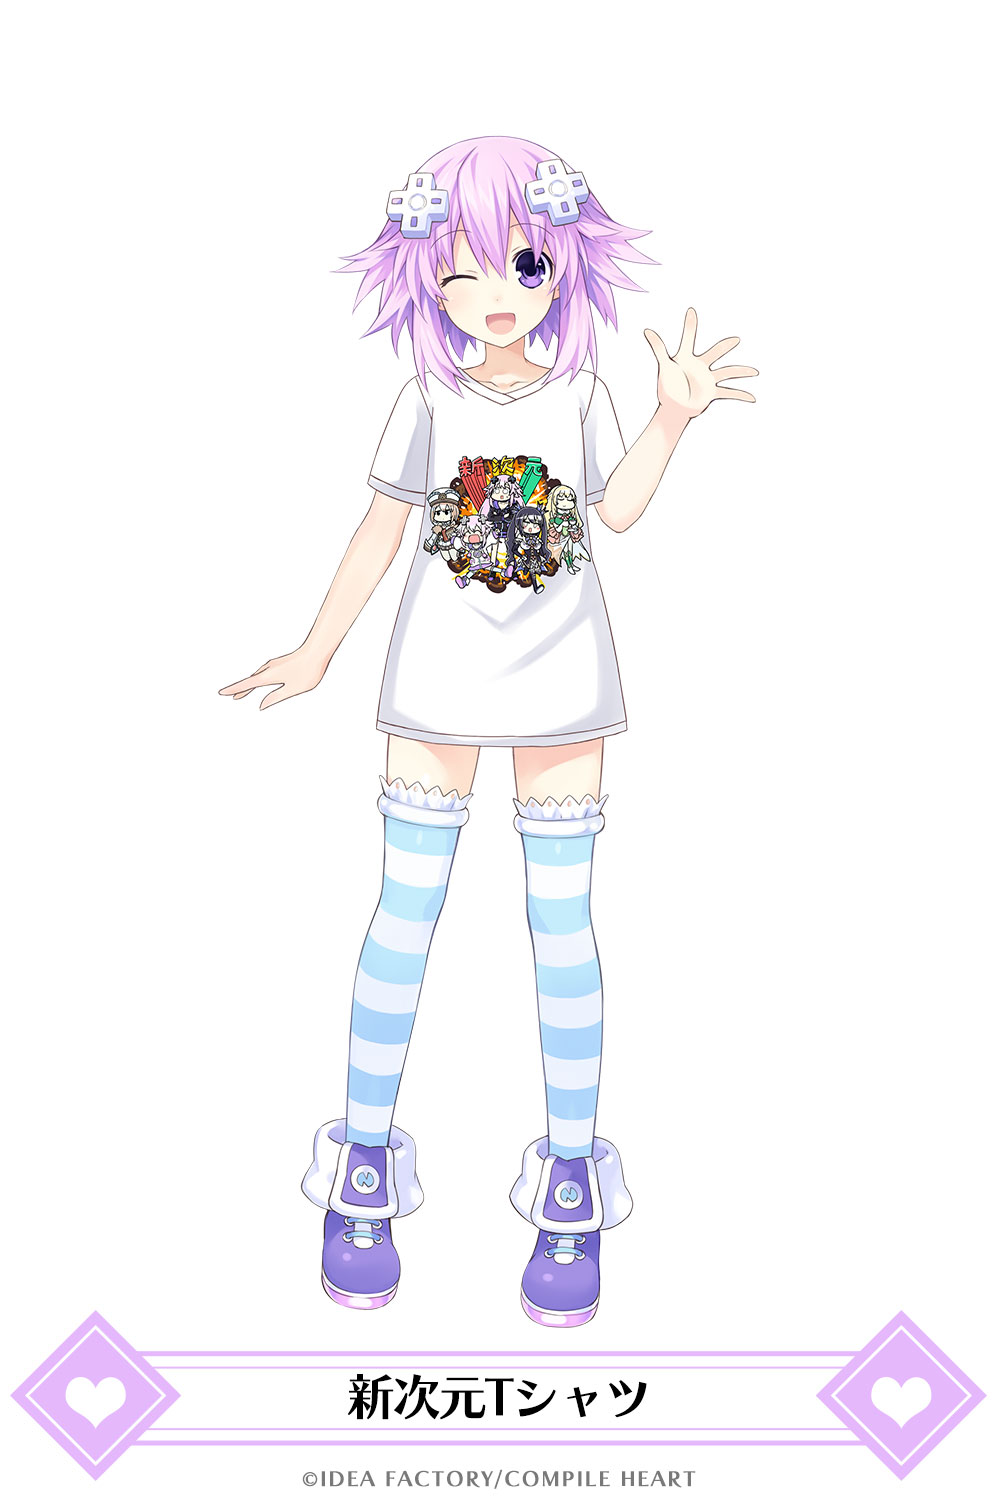 1girl :d adult_neptune blanc bottomless character_print company_name d-pad full_body hair_ornament hairclip highres looking_at_viewer neptune_(choujigen_game_neptune) neptune_(series) noire official_art one_eye_closed open_mouth purple_hair shin_jigen_game_neptune_vii shirt shoes short_hair simple_background smile solo striped striped_legwear t-shirt thigh-highs vert violet_eyes waving white_background